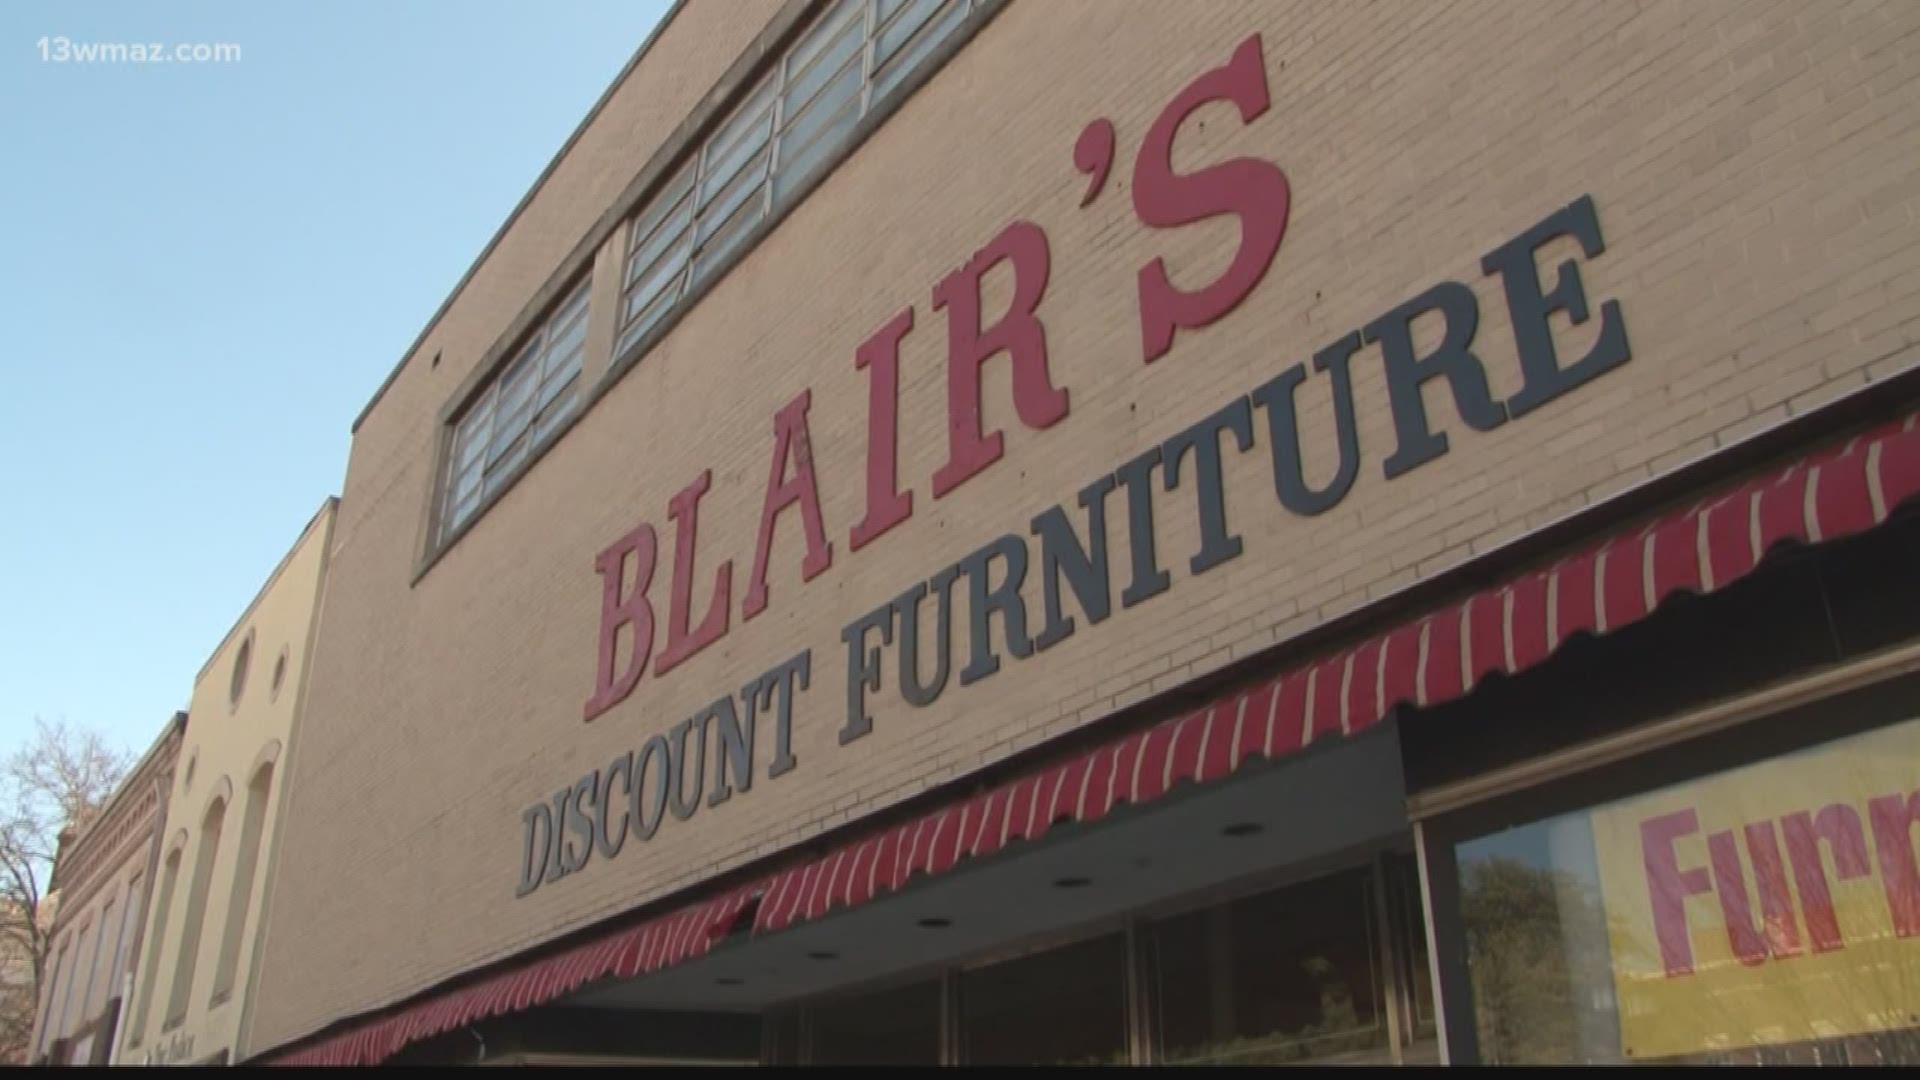 Blair's Discount Furniture, a store that has been a Macon staple since the 1970s, officially closed its doors Friday.